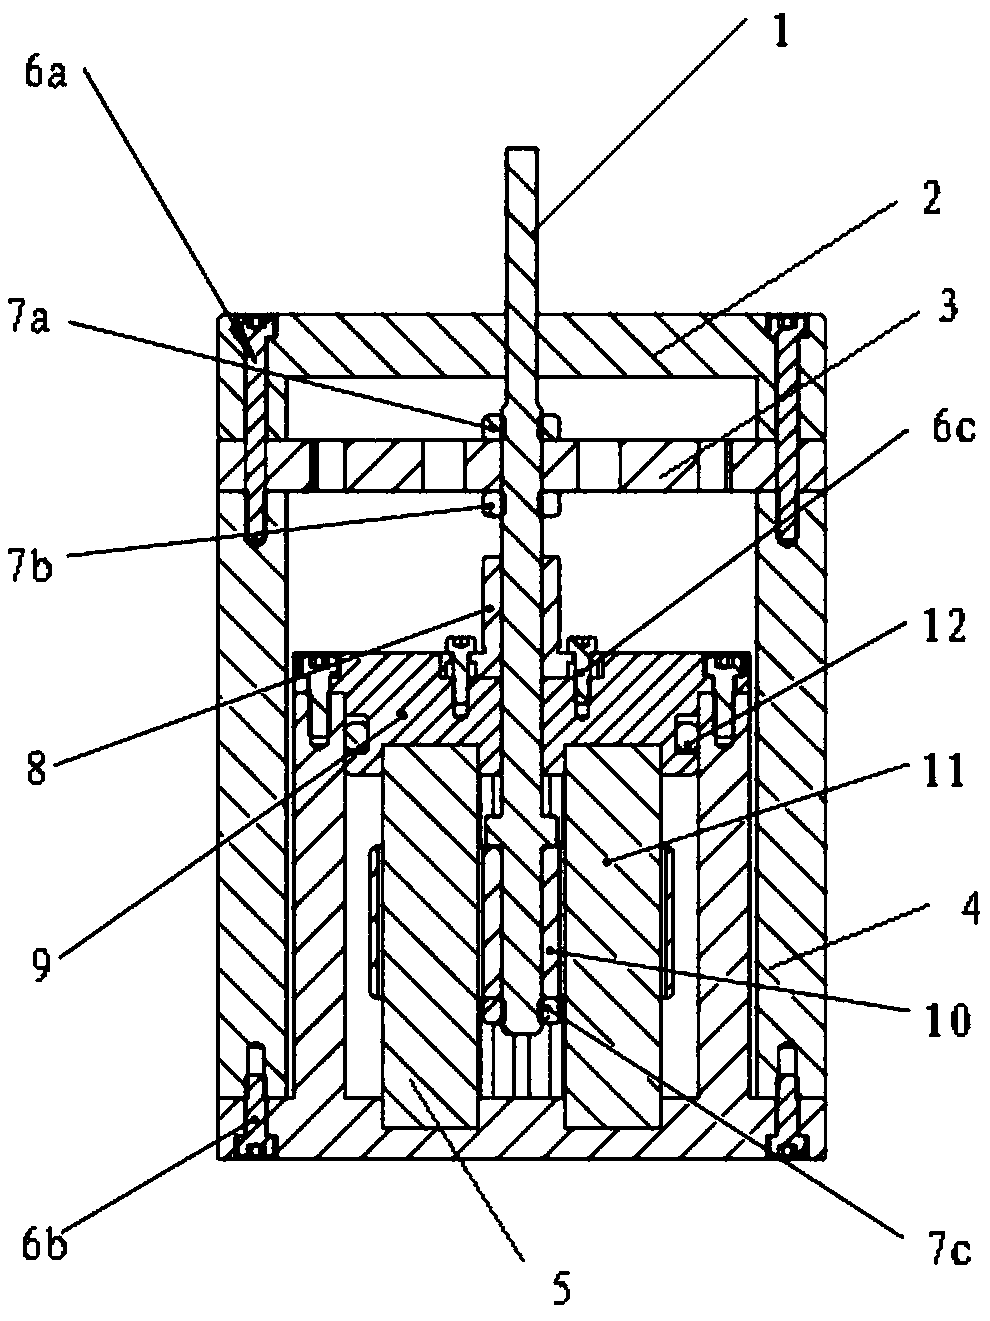 Damping-variable rigidity-adjustable absorber